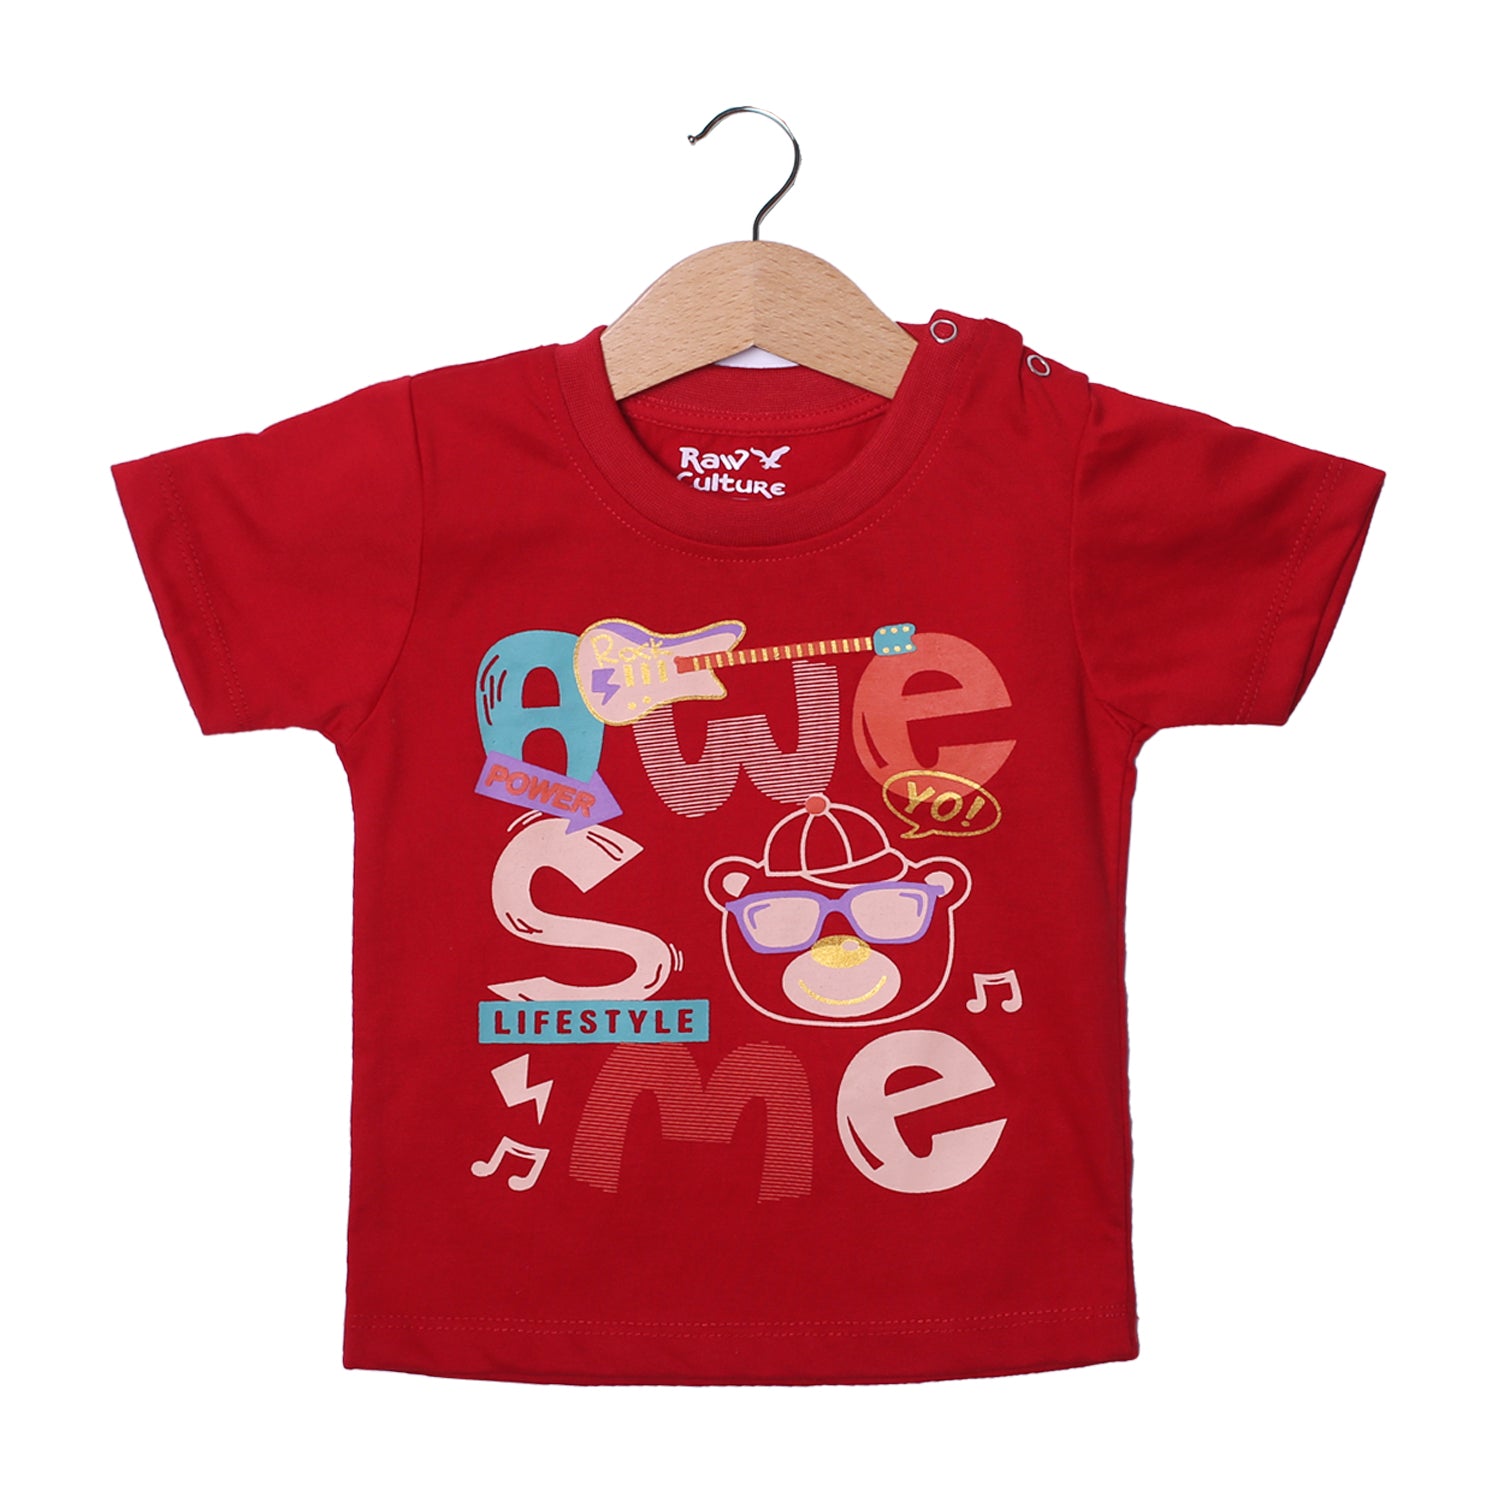 NEW RED AWESOME PRINTED HALF SLEEVES T-SHIRT